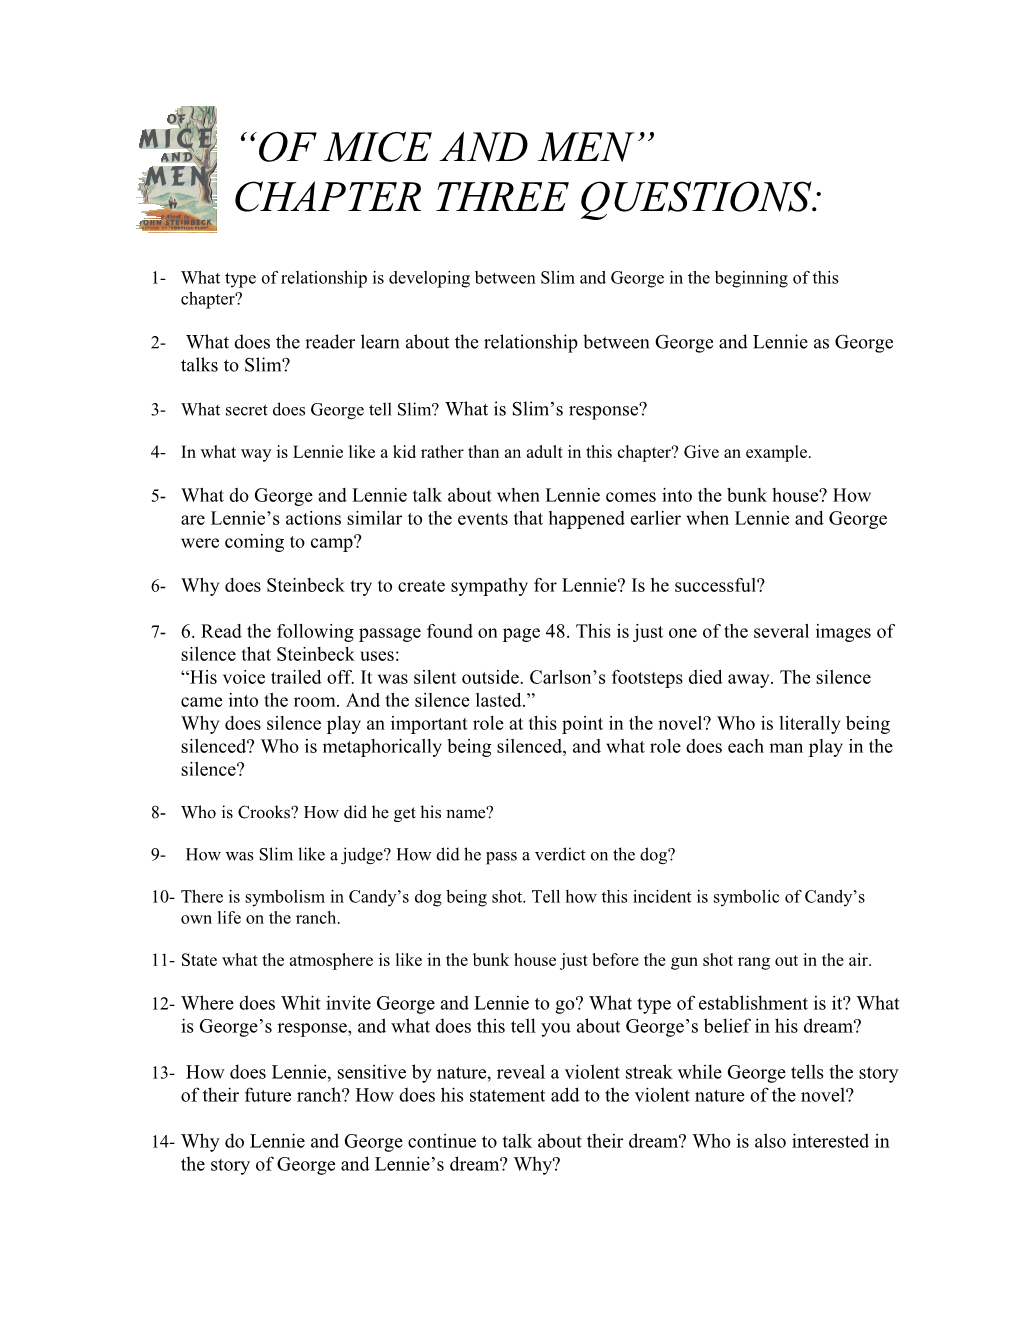 Chapter Three Questions